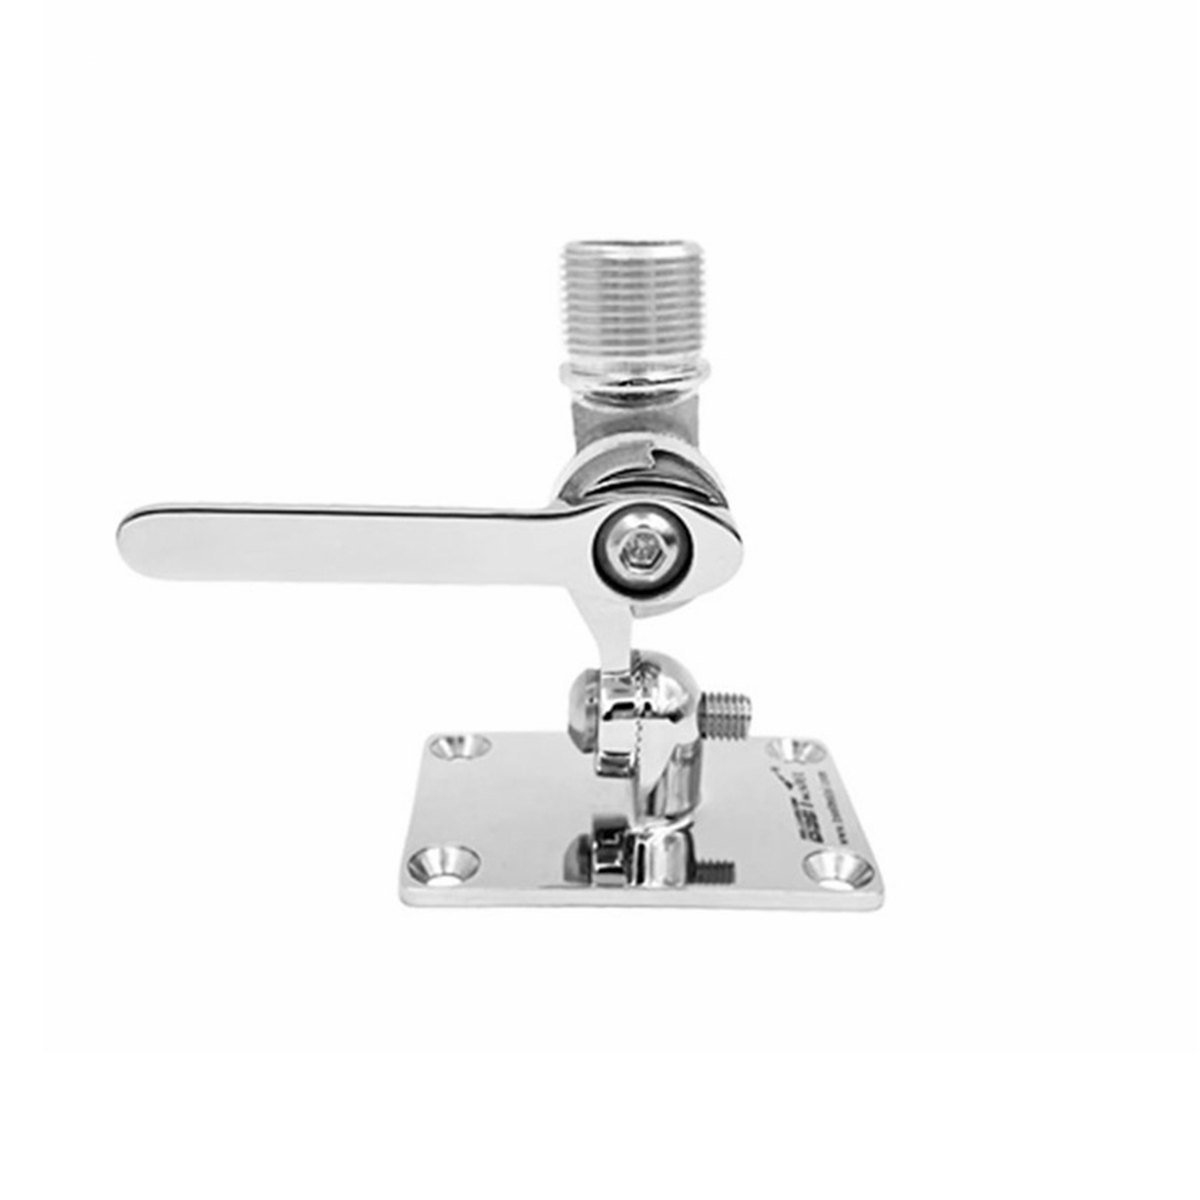 

Stainless Steel Marine VHF Antenna Mount Dual Axis Heavy Duty Ratchet Mount Adjustable Base Mount for Boats Rowing Accessories